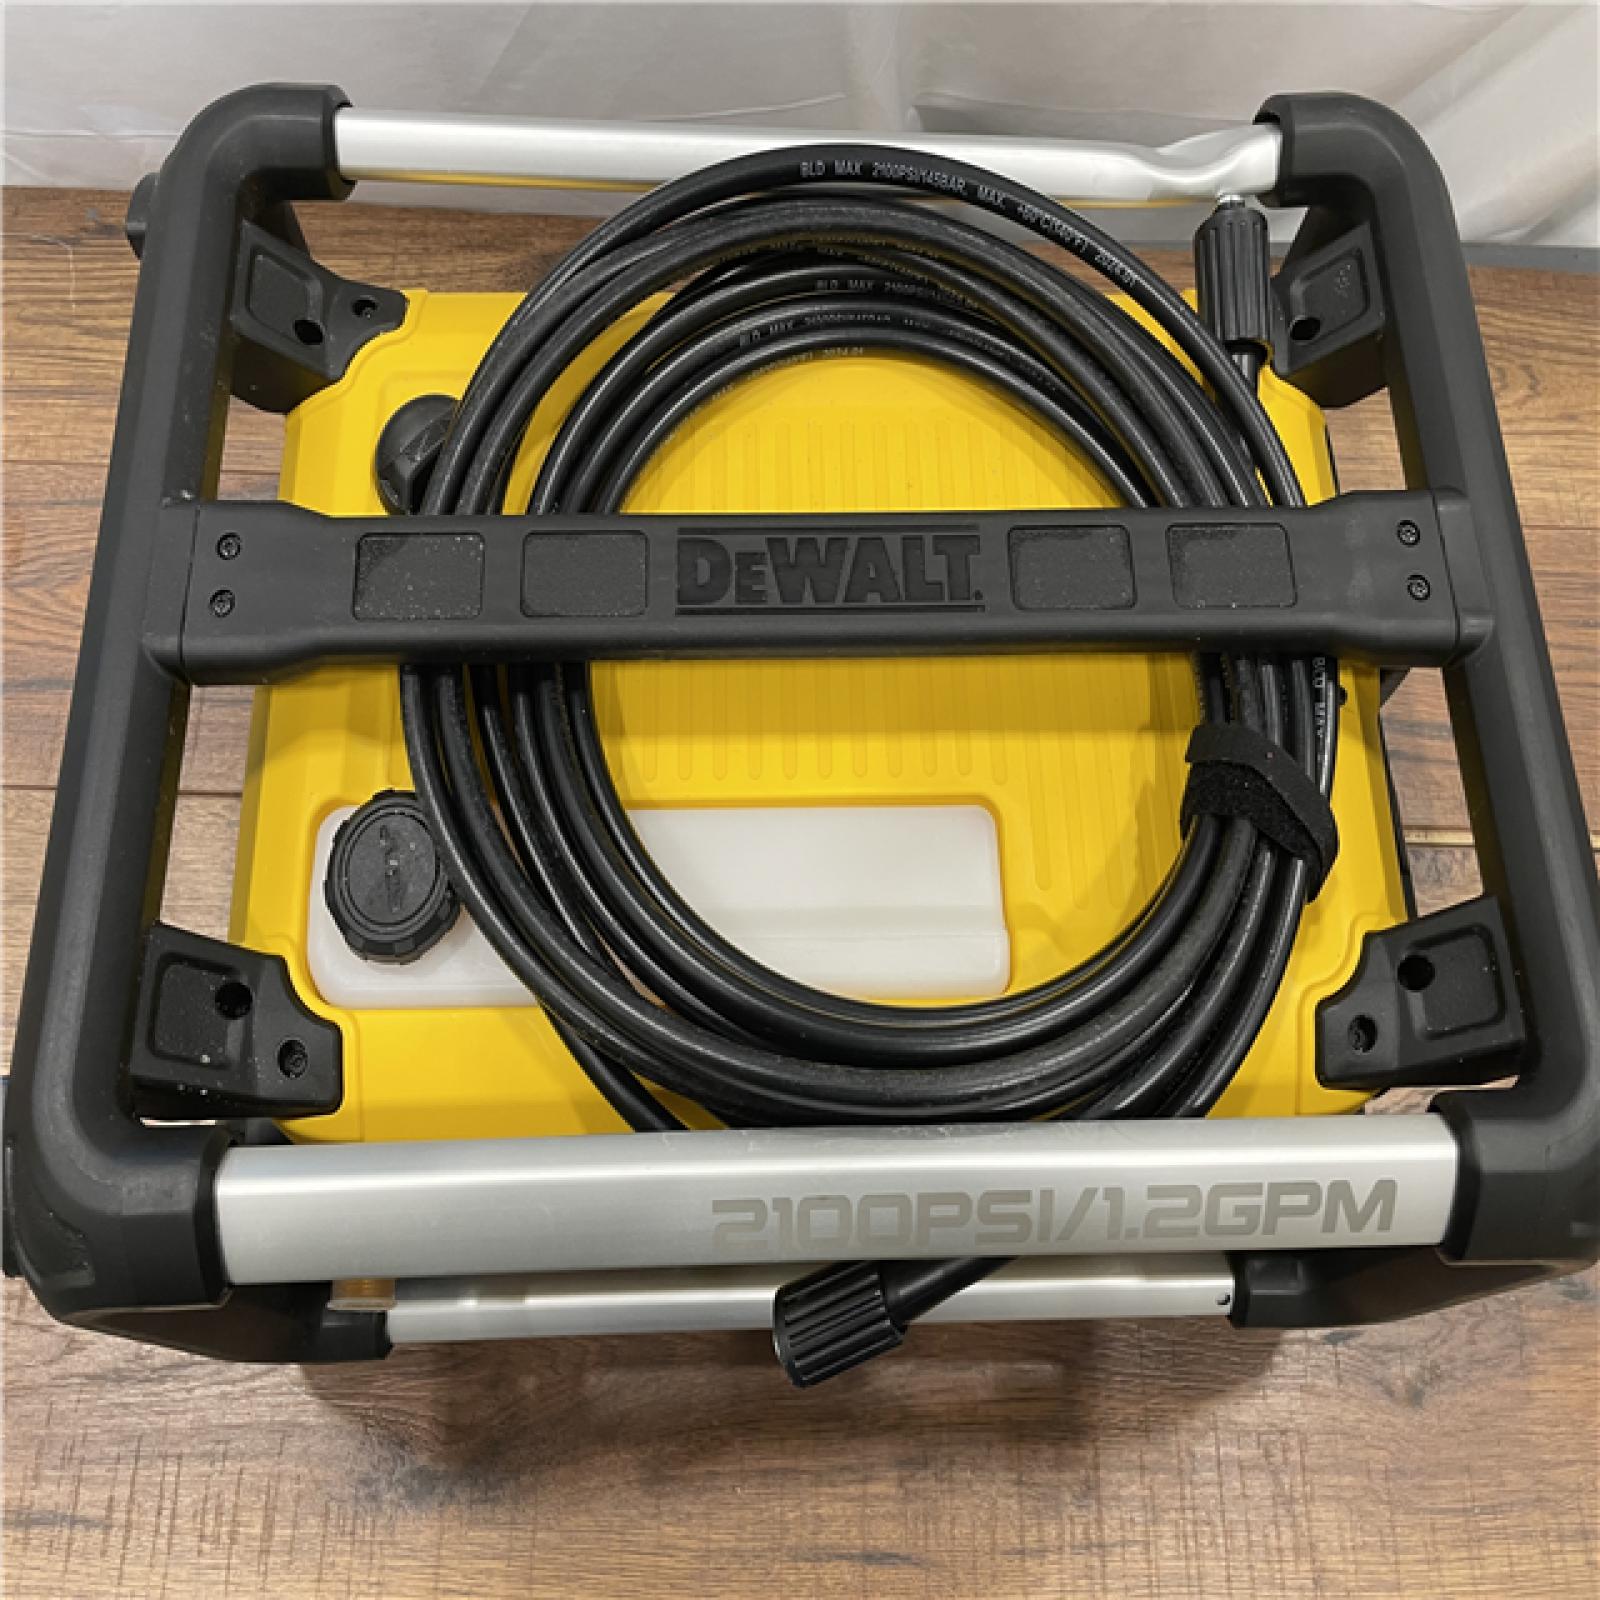 AS-IS DEWALT 2100 PSI 1.2 GPM 13 Amp Cold Water Electric Pressure Washer with Internal Equipment Storage